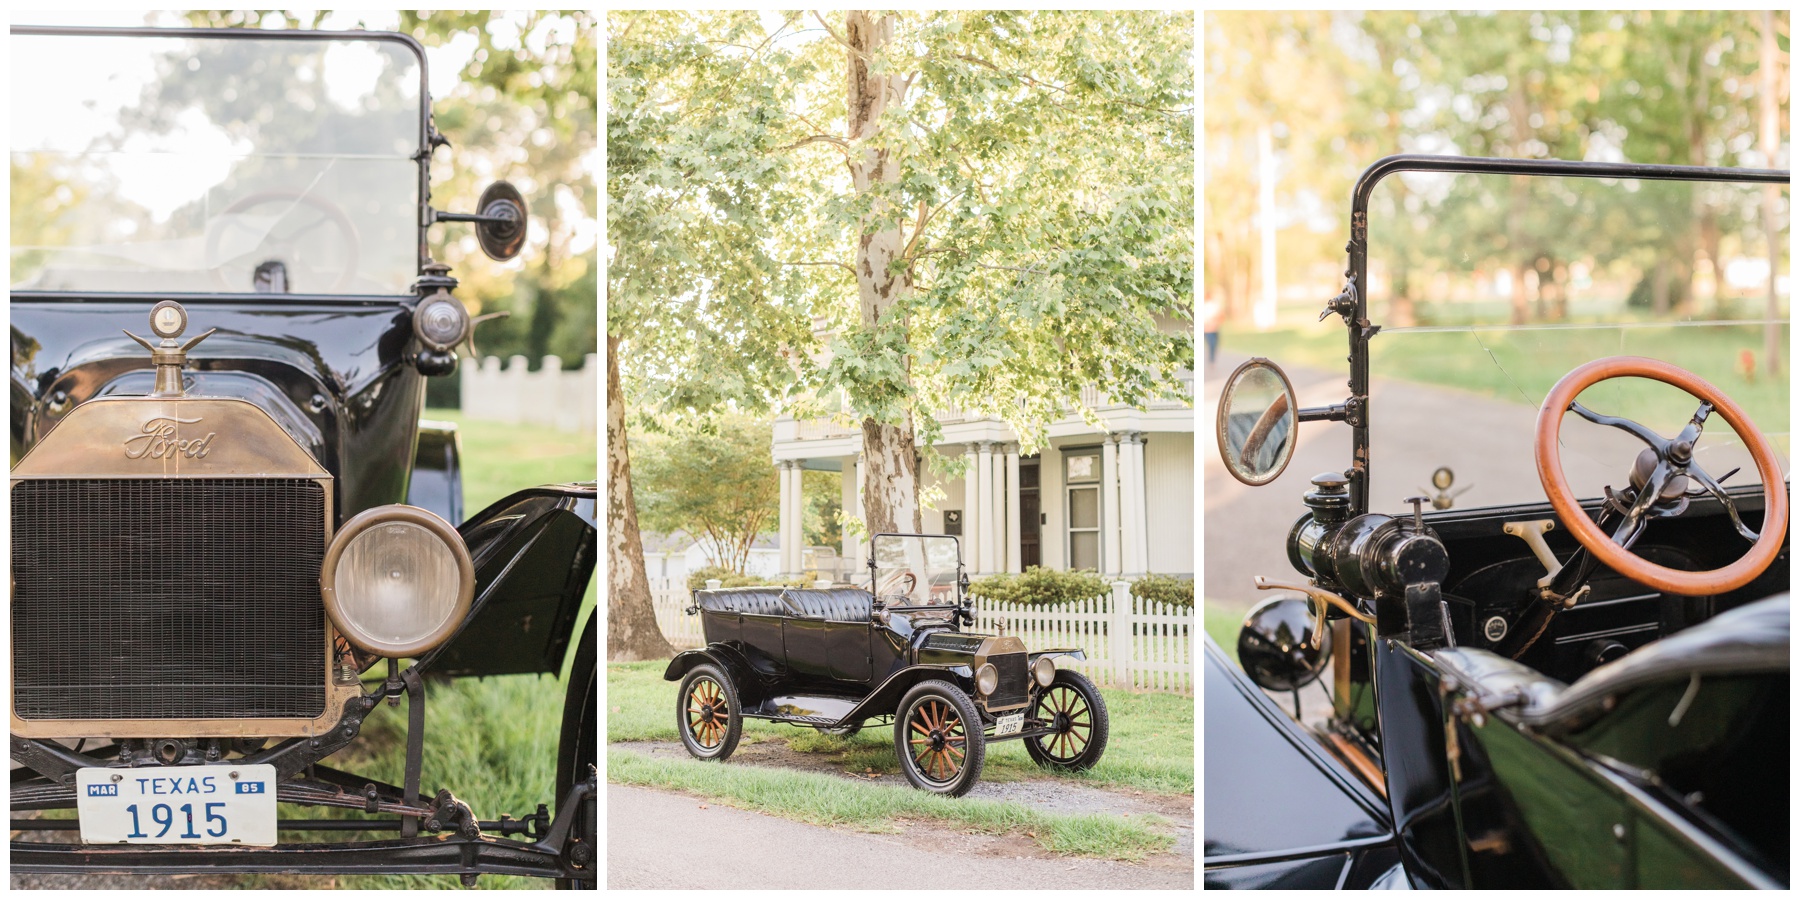 Engagement session with a vintage car